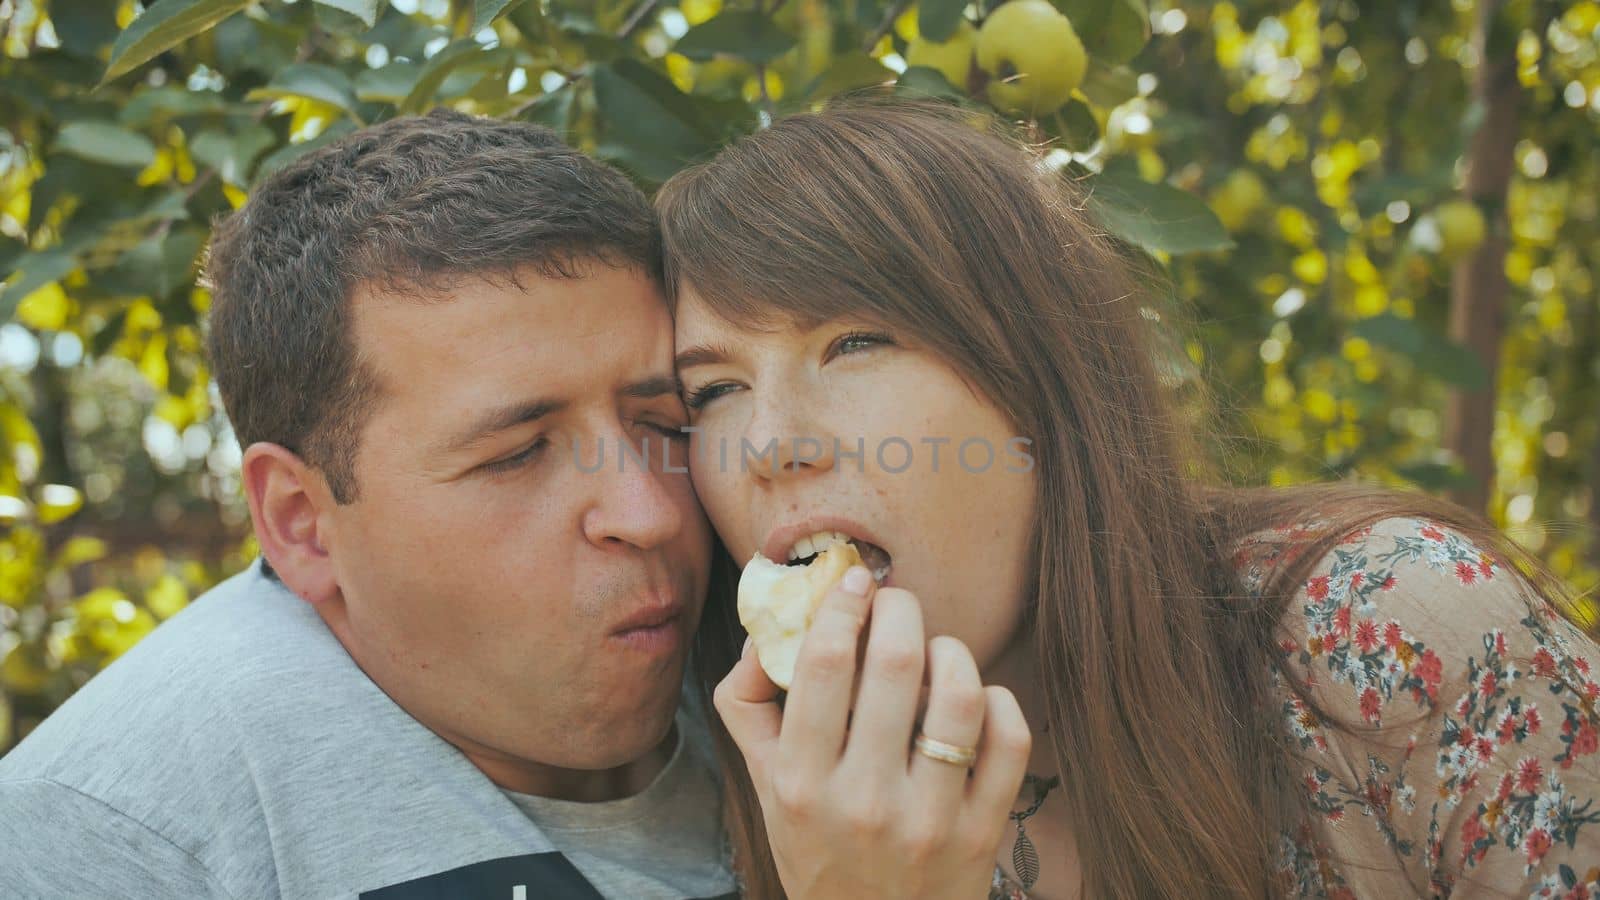 A couple in love eating apples in the orchard